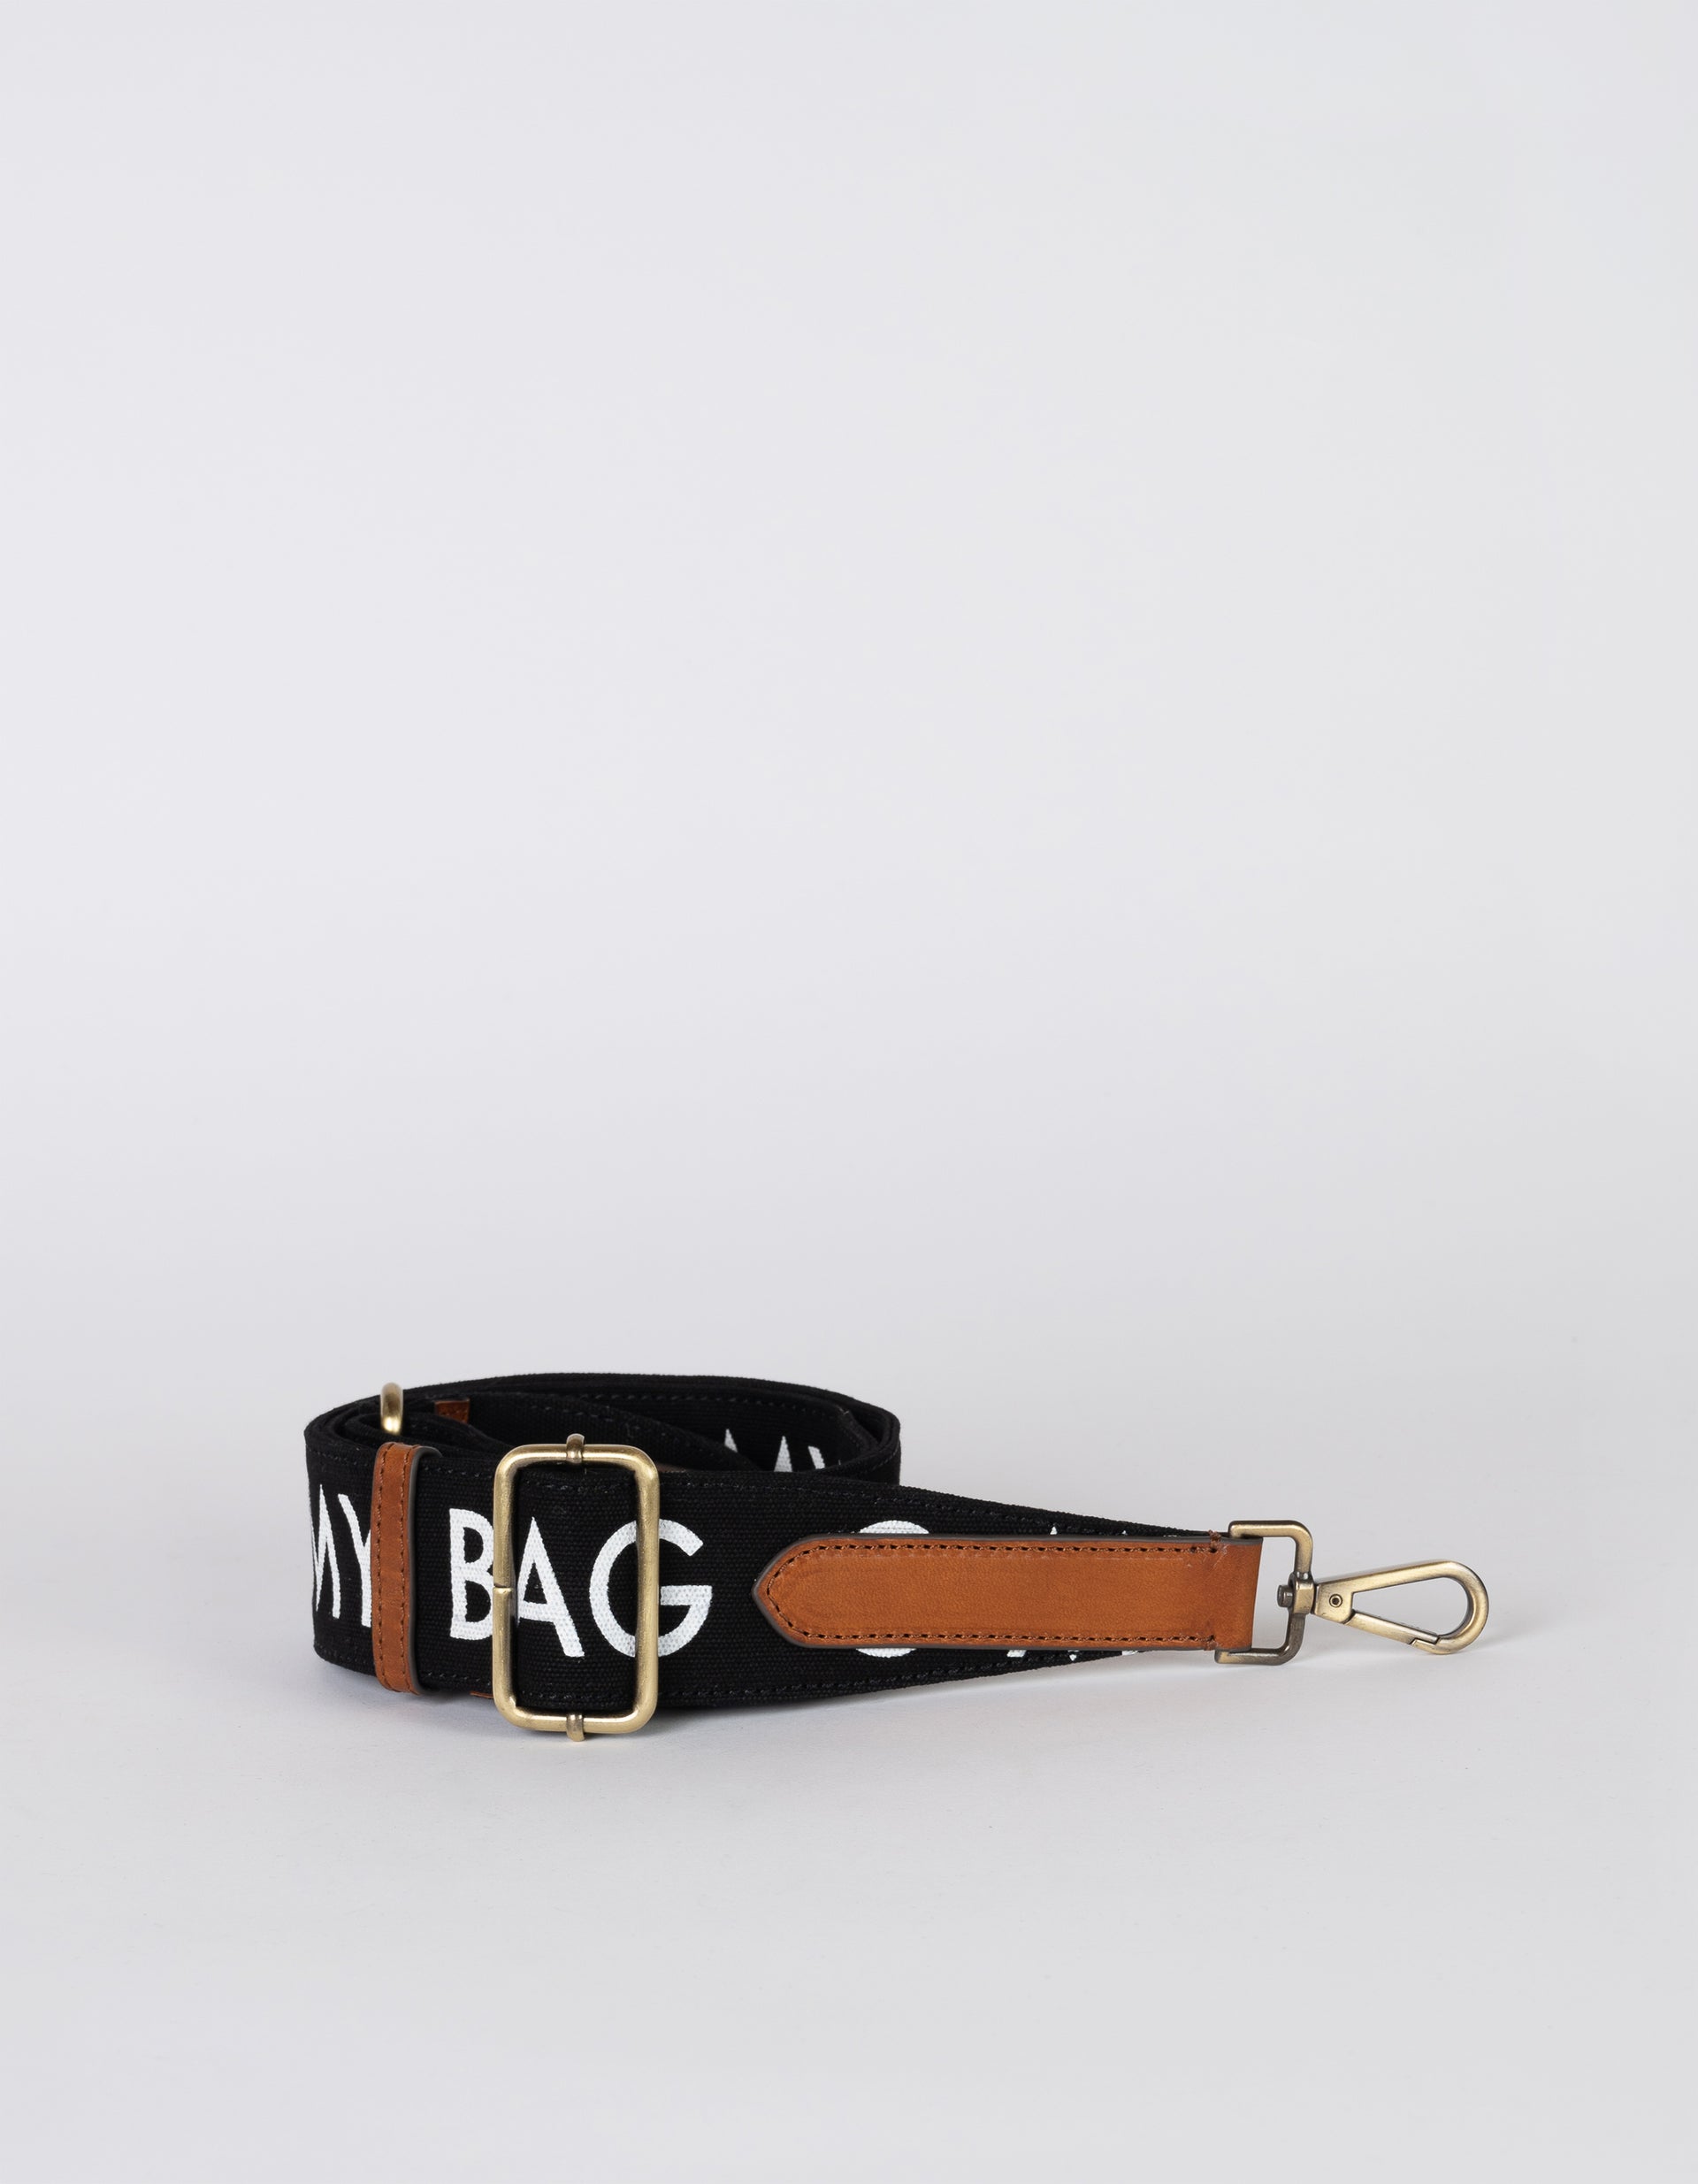 Canvas logo strap black with cognac classic leather - rolled